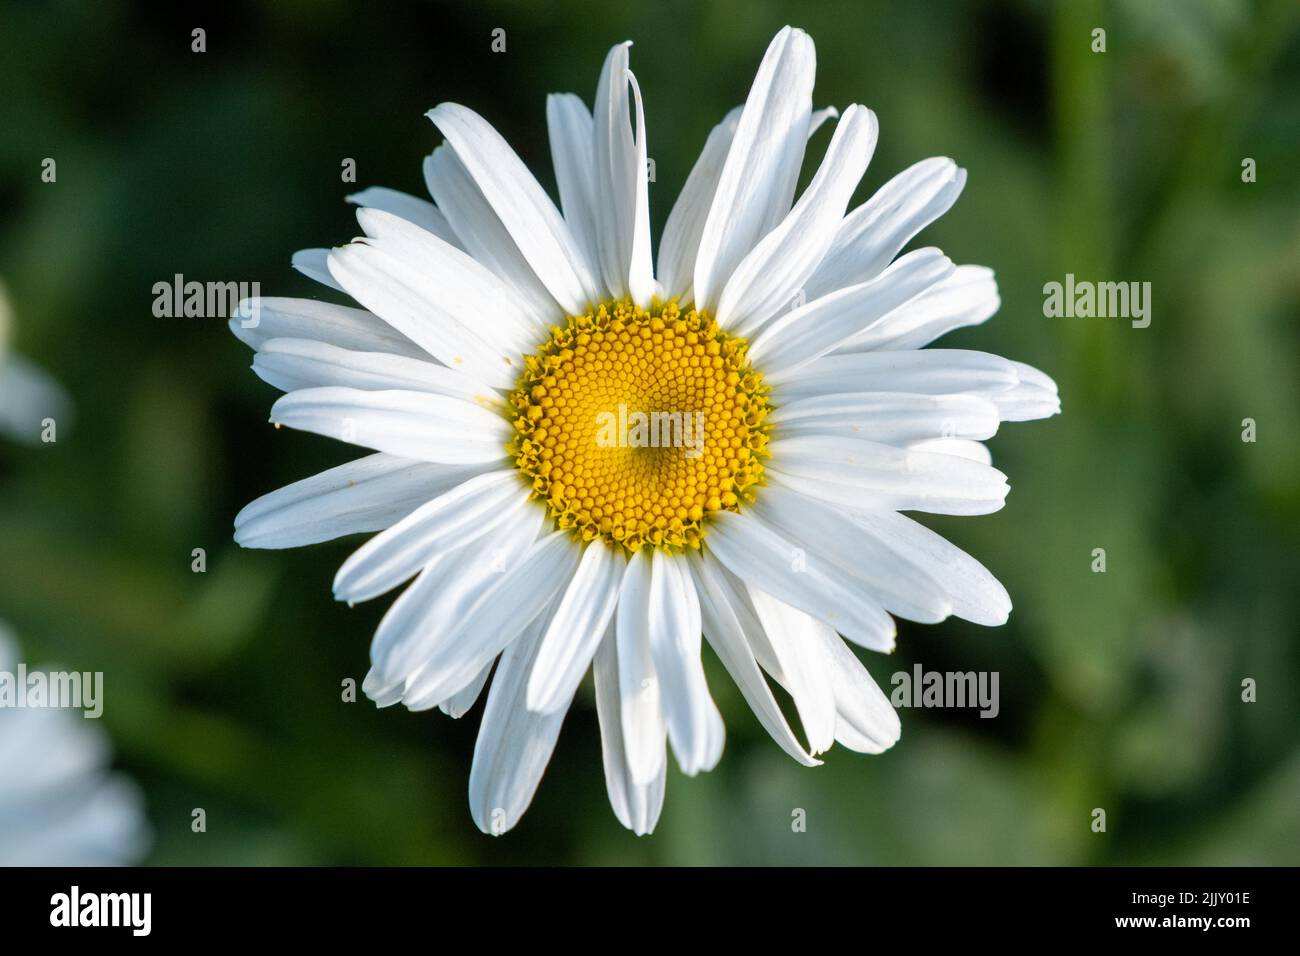 Isolated single white flower Argyranthemum frutescens, known as Paris daisy, marguerite or marguerite daisy in the green grass on a sunny day. Stock Photo